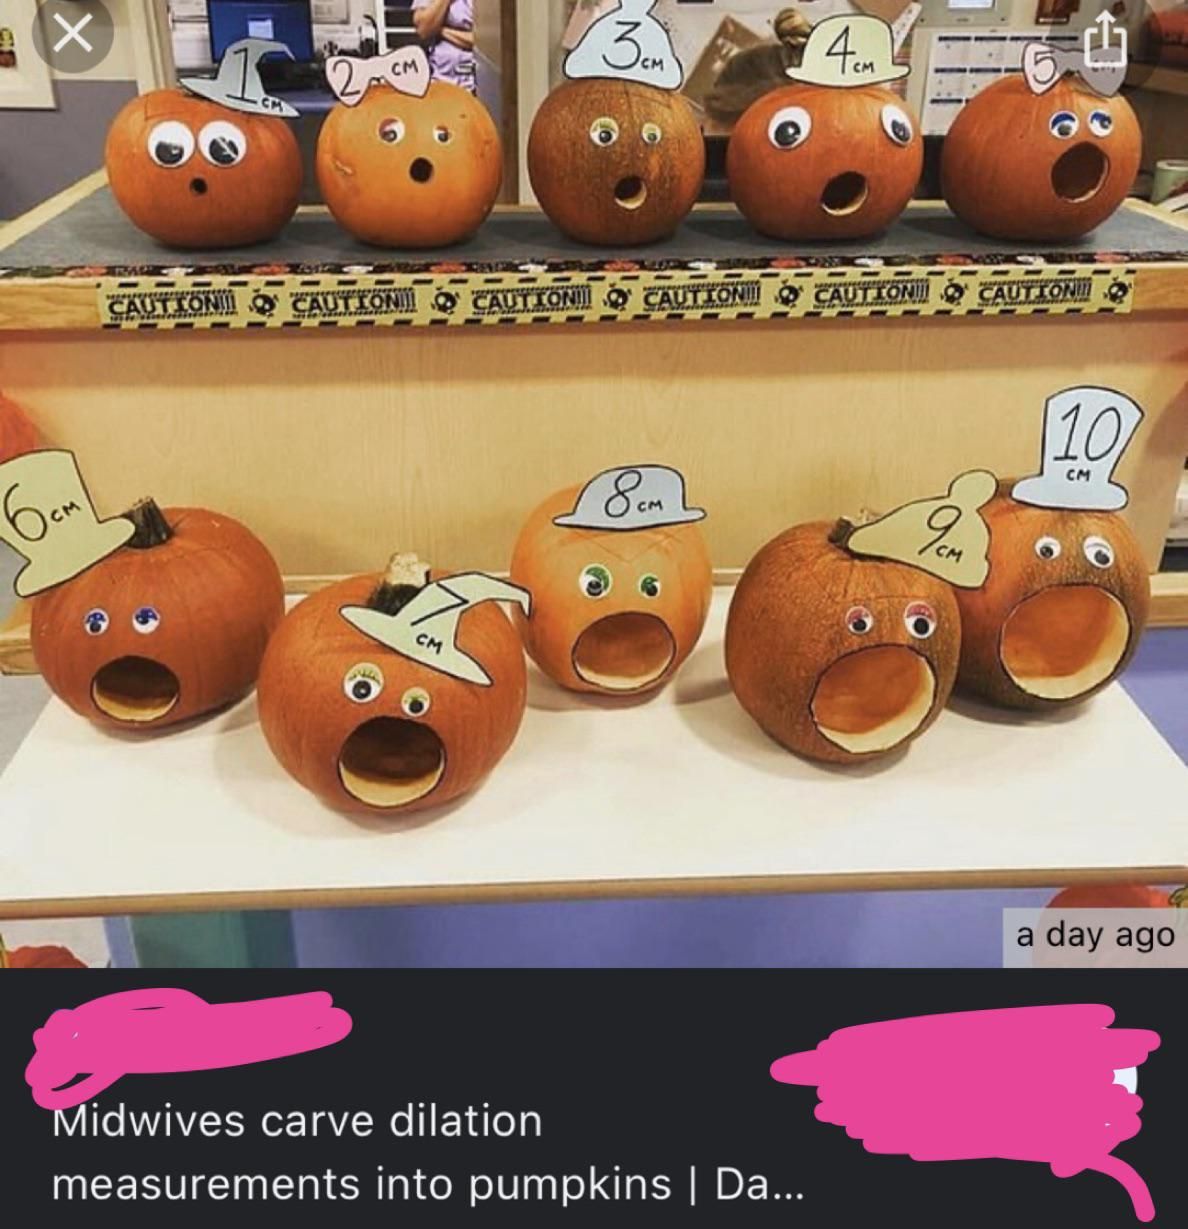 Midwives cut women’s dilation size into pumpkins for a truly horrifying sight!